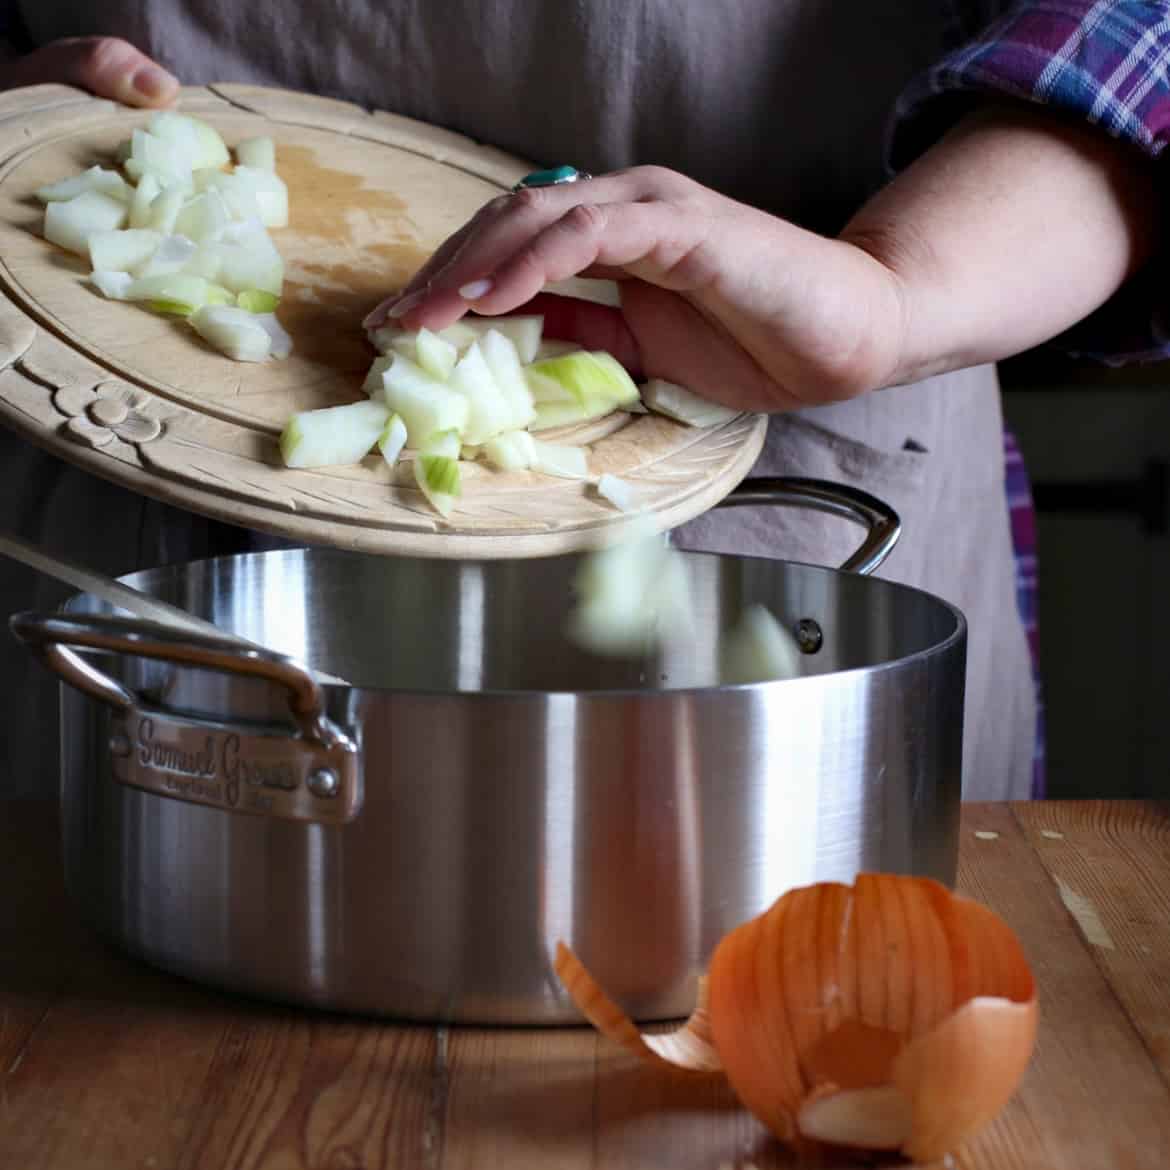 Womans hands scraping chopped onions from a wooden chopping board into a silver saucepan